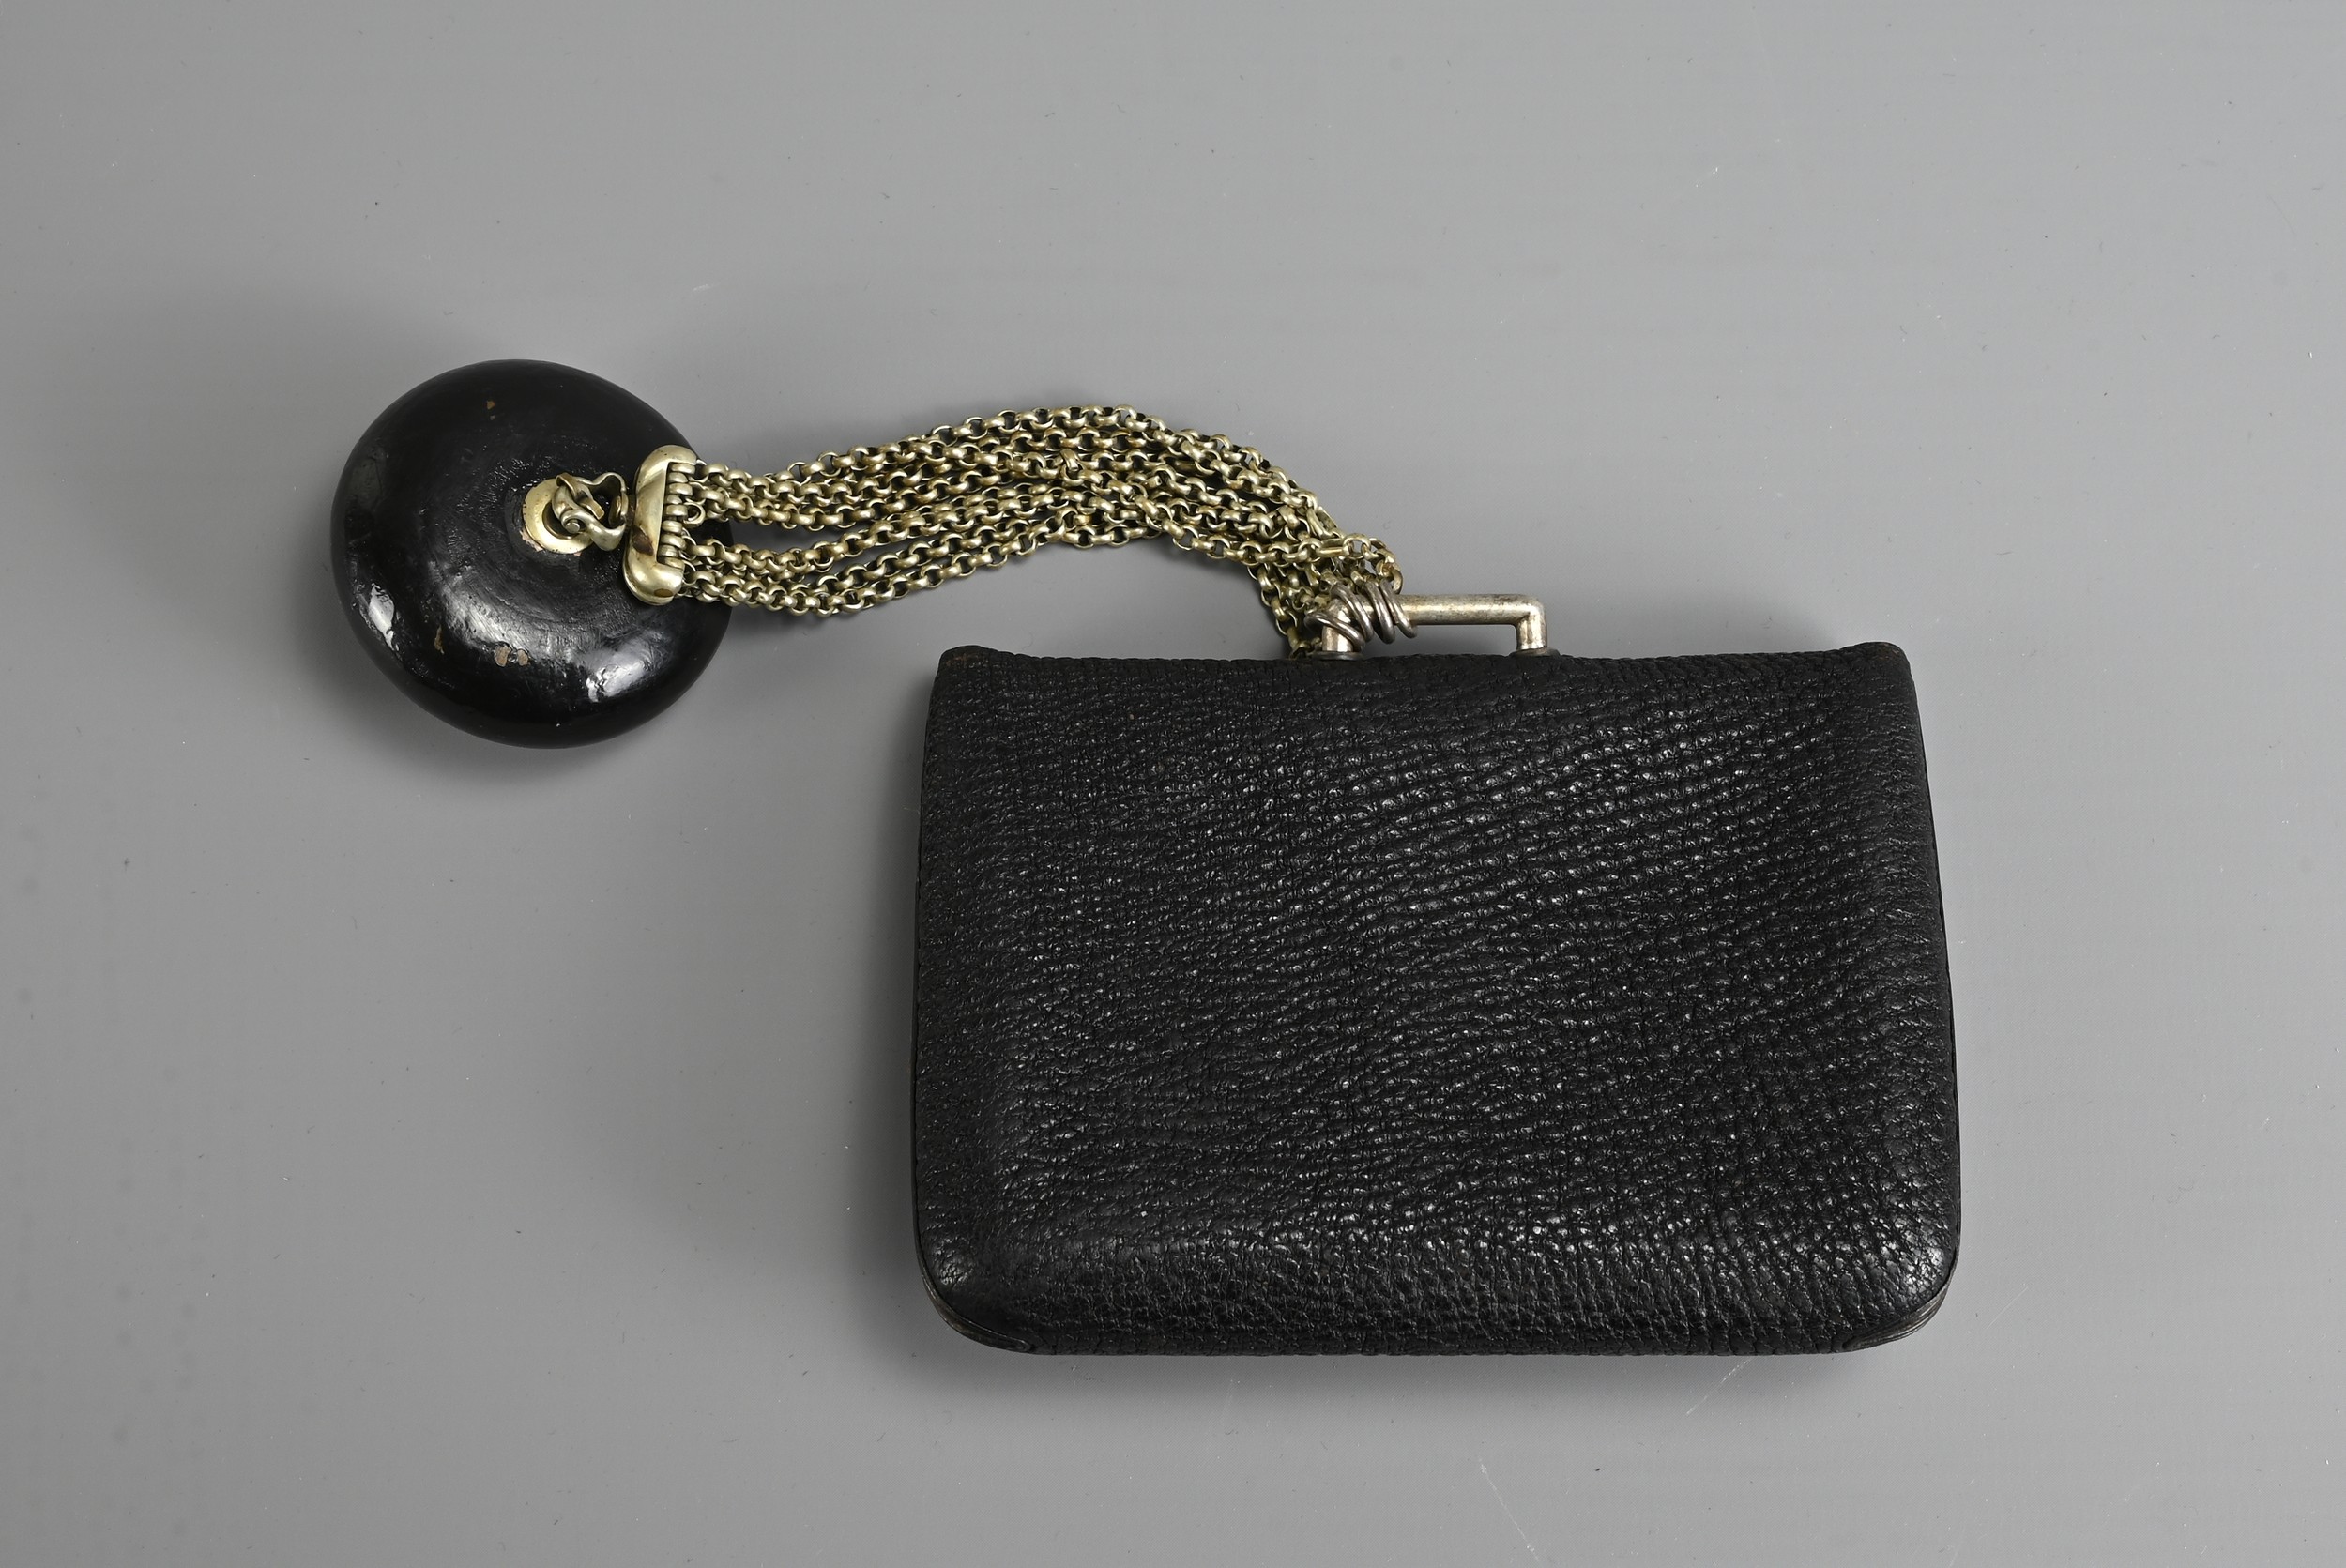 A JAPANESE MEIJI PERIOD (1868-1912) BLACK LEATHER COIN POUCH (FUKURO) WITH SILVER-COLOURED METAL - Image 4 of 6